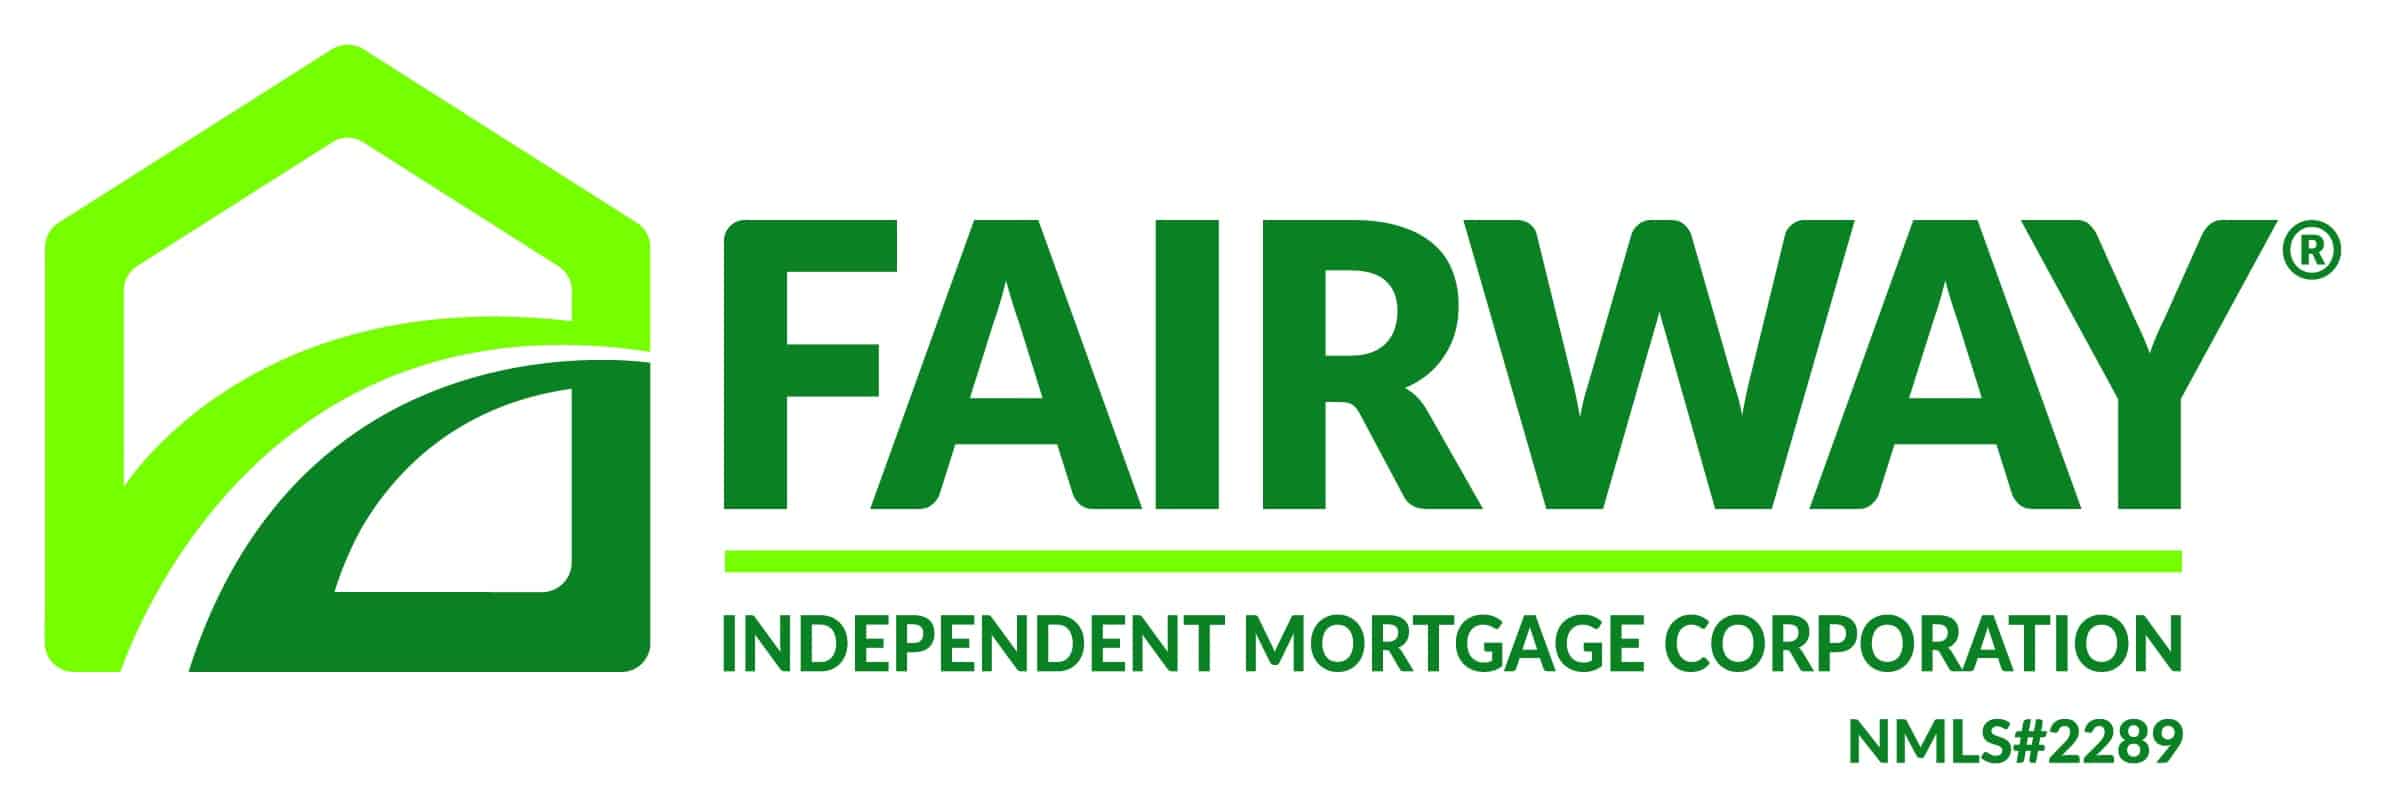 Fairway Independent Mortgage Corp logo